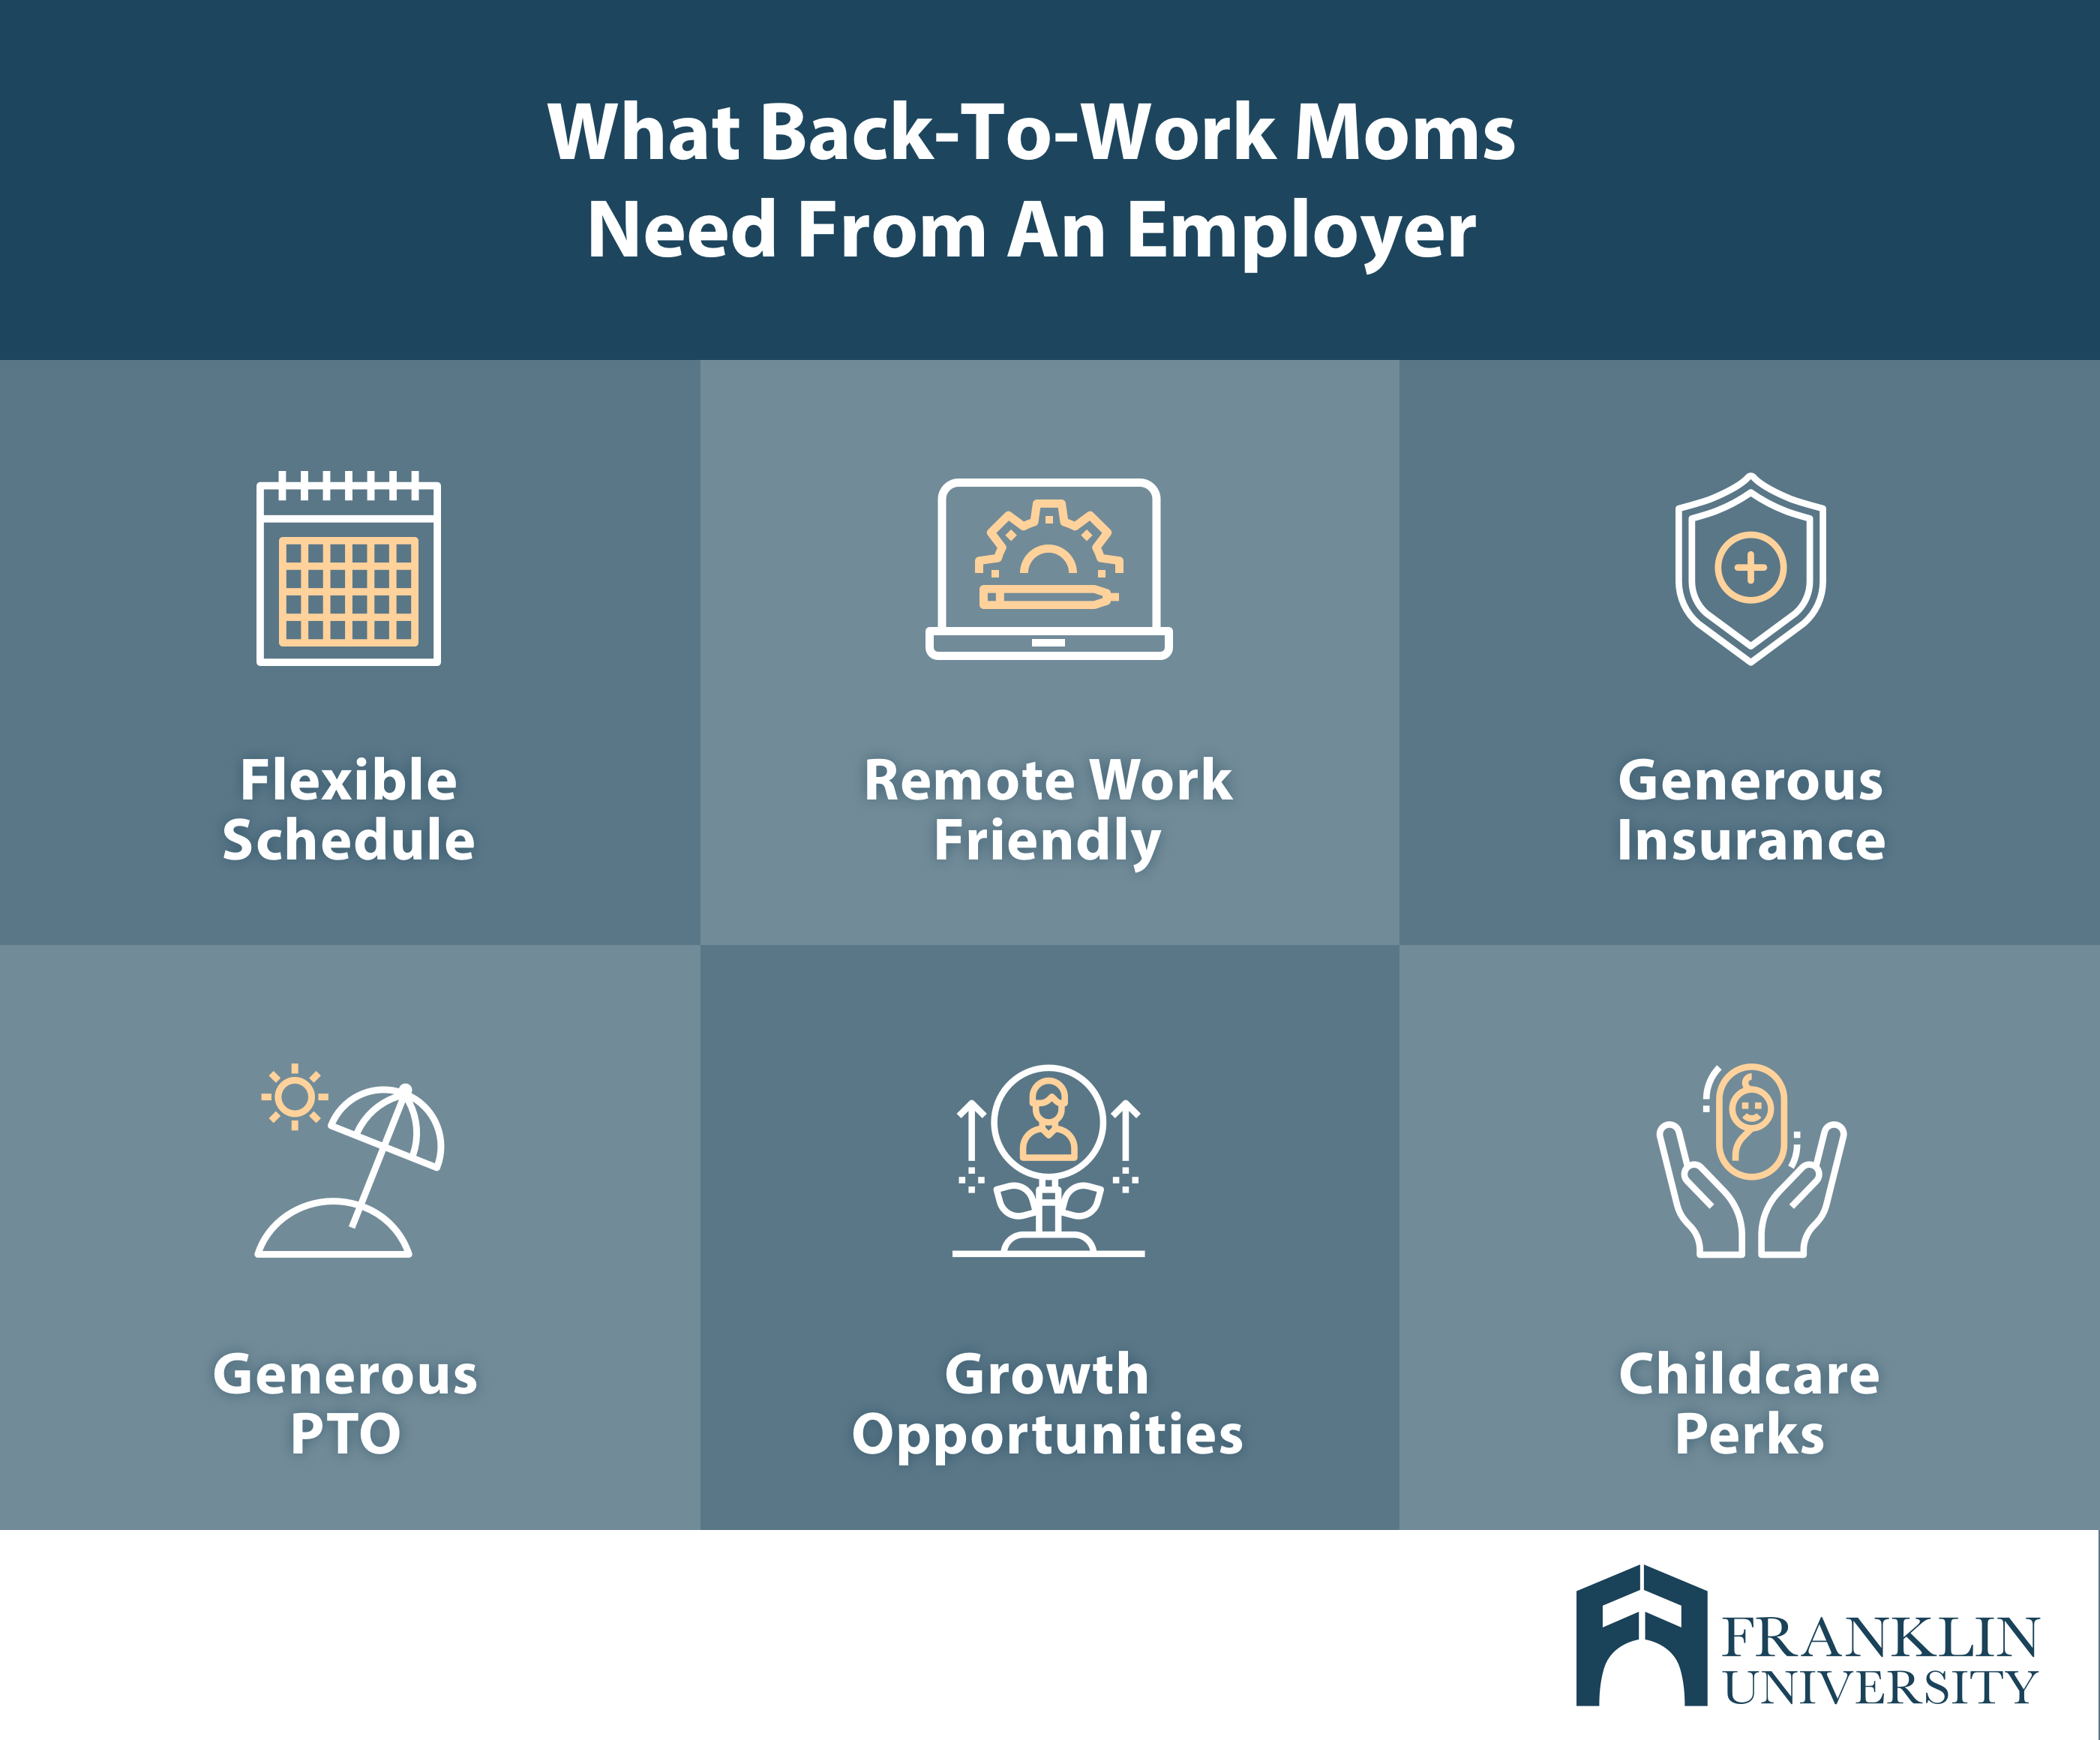 Best Jobs For Moms: 5 Family-Friendly Careers To Consider